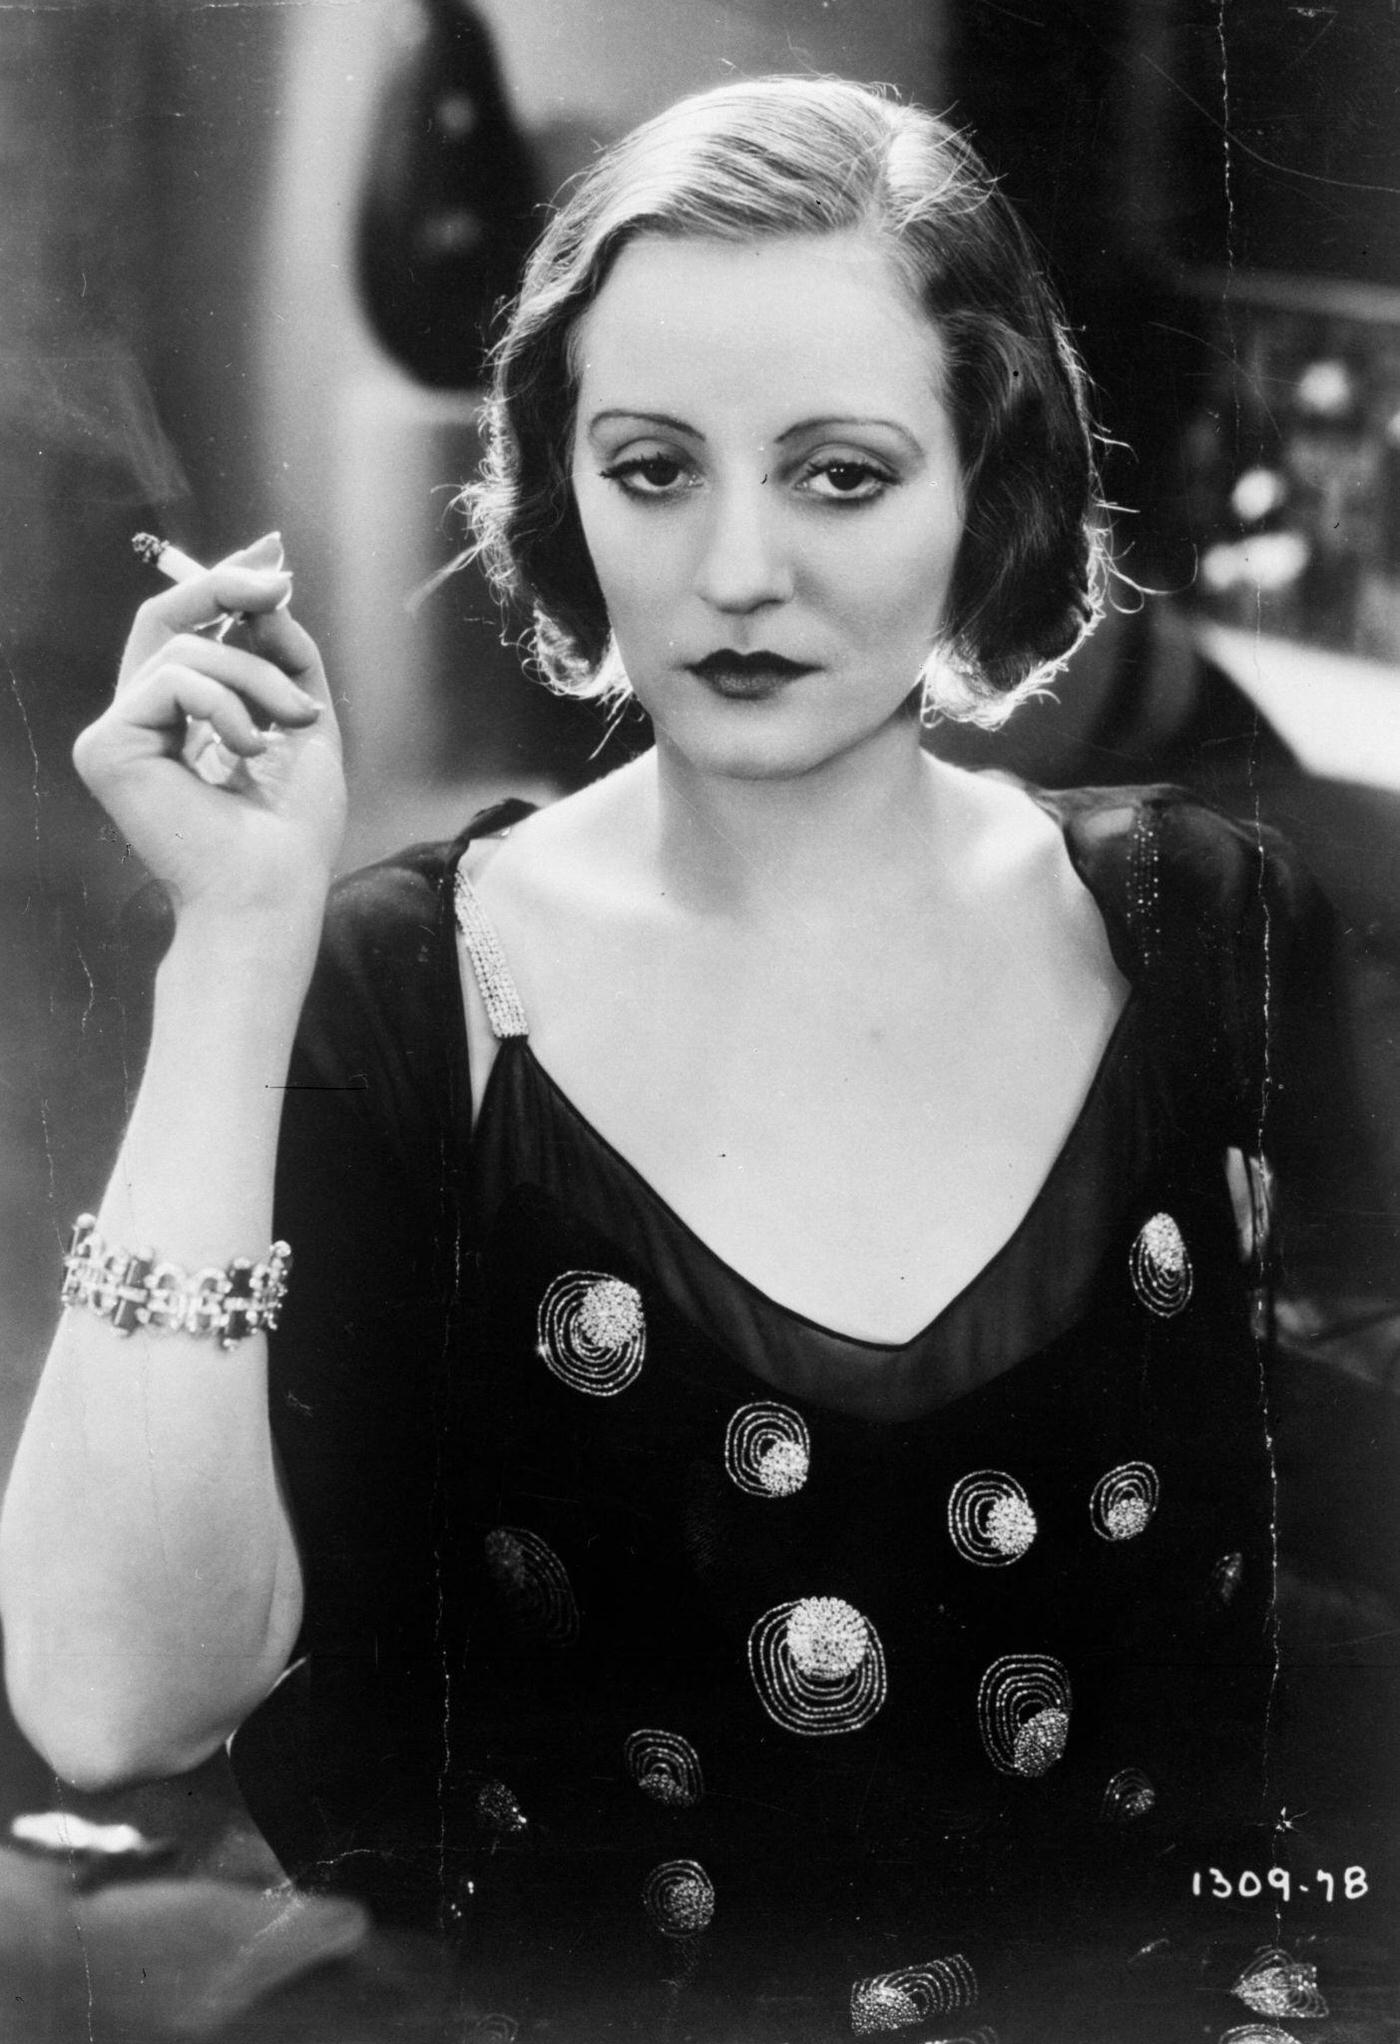 Actress Tallulah Bankhead having a sultry smoke, 1968.